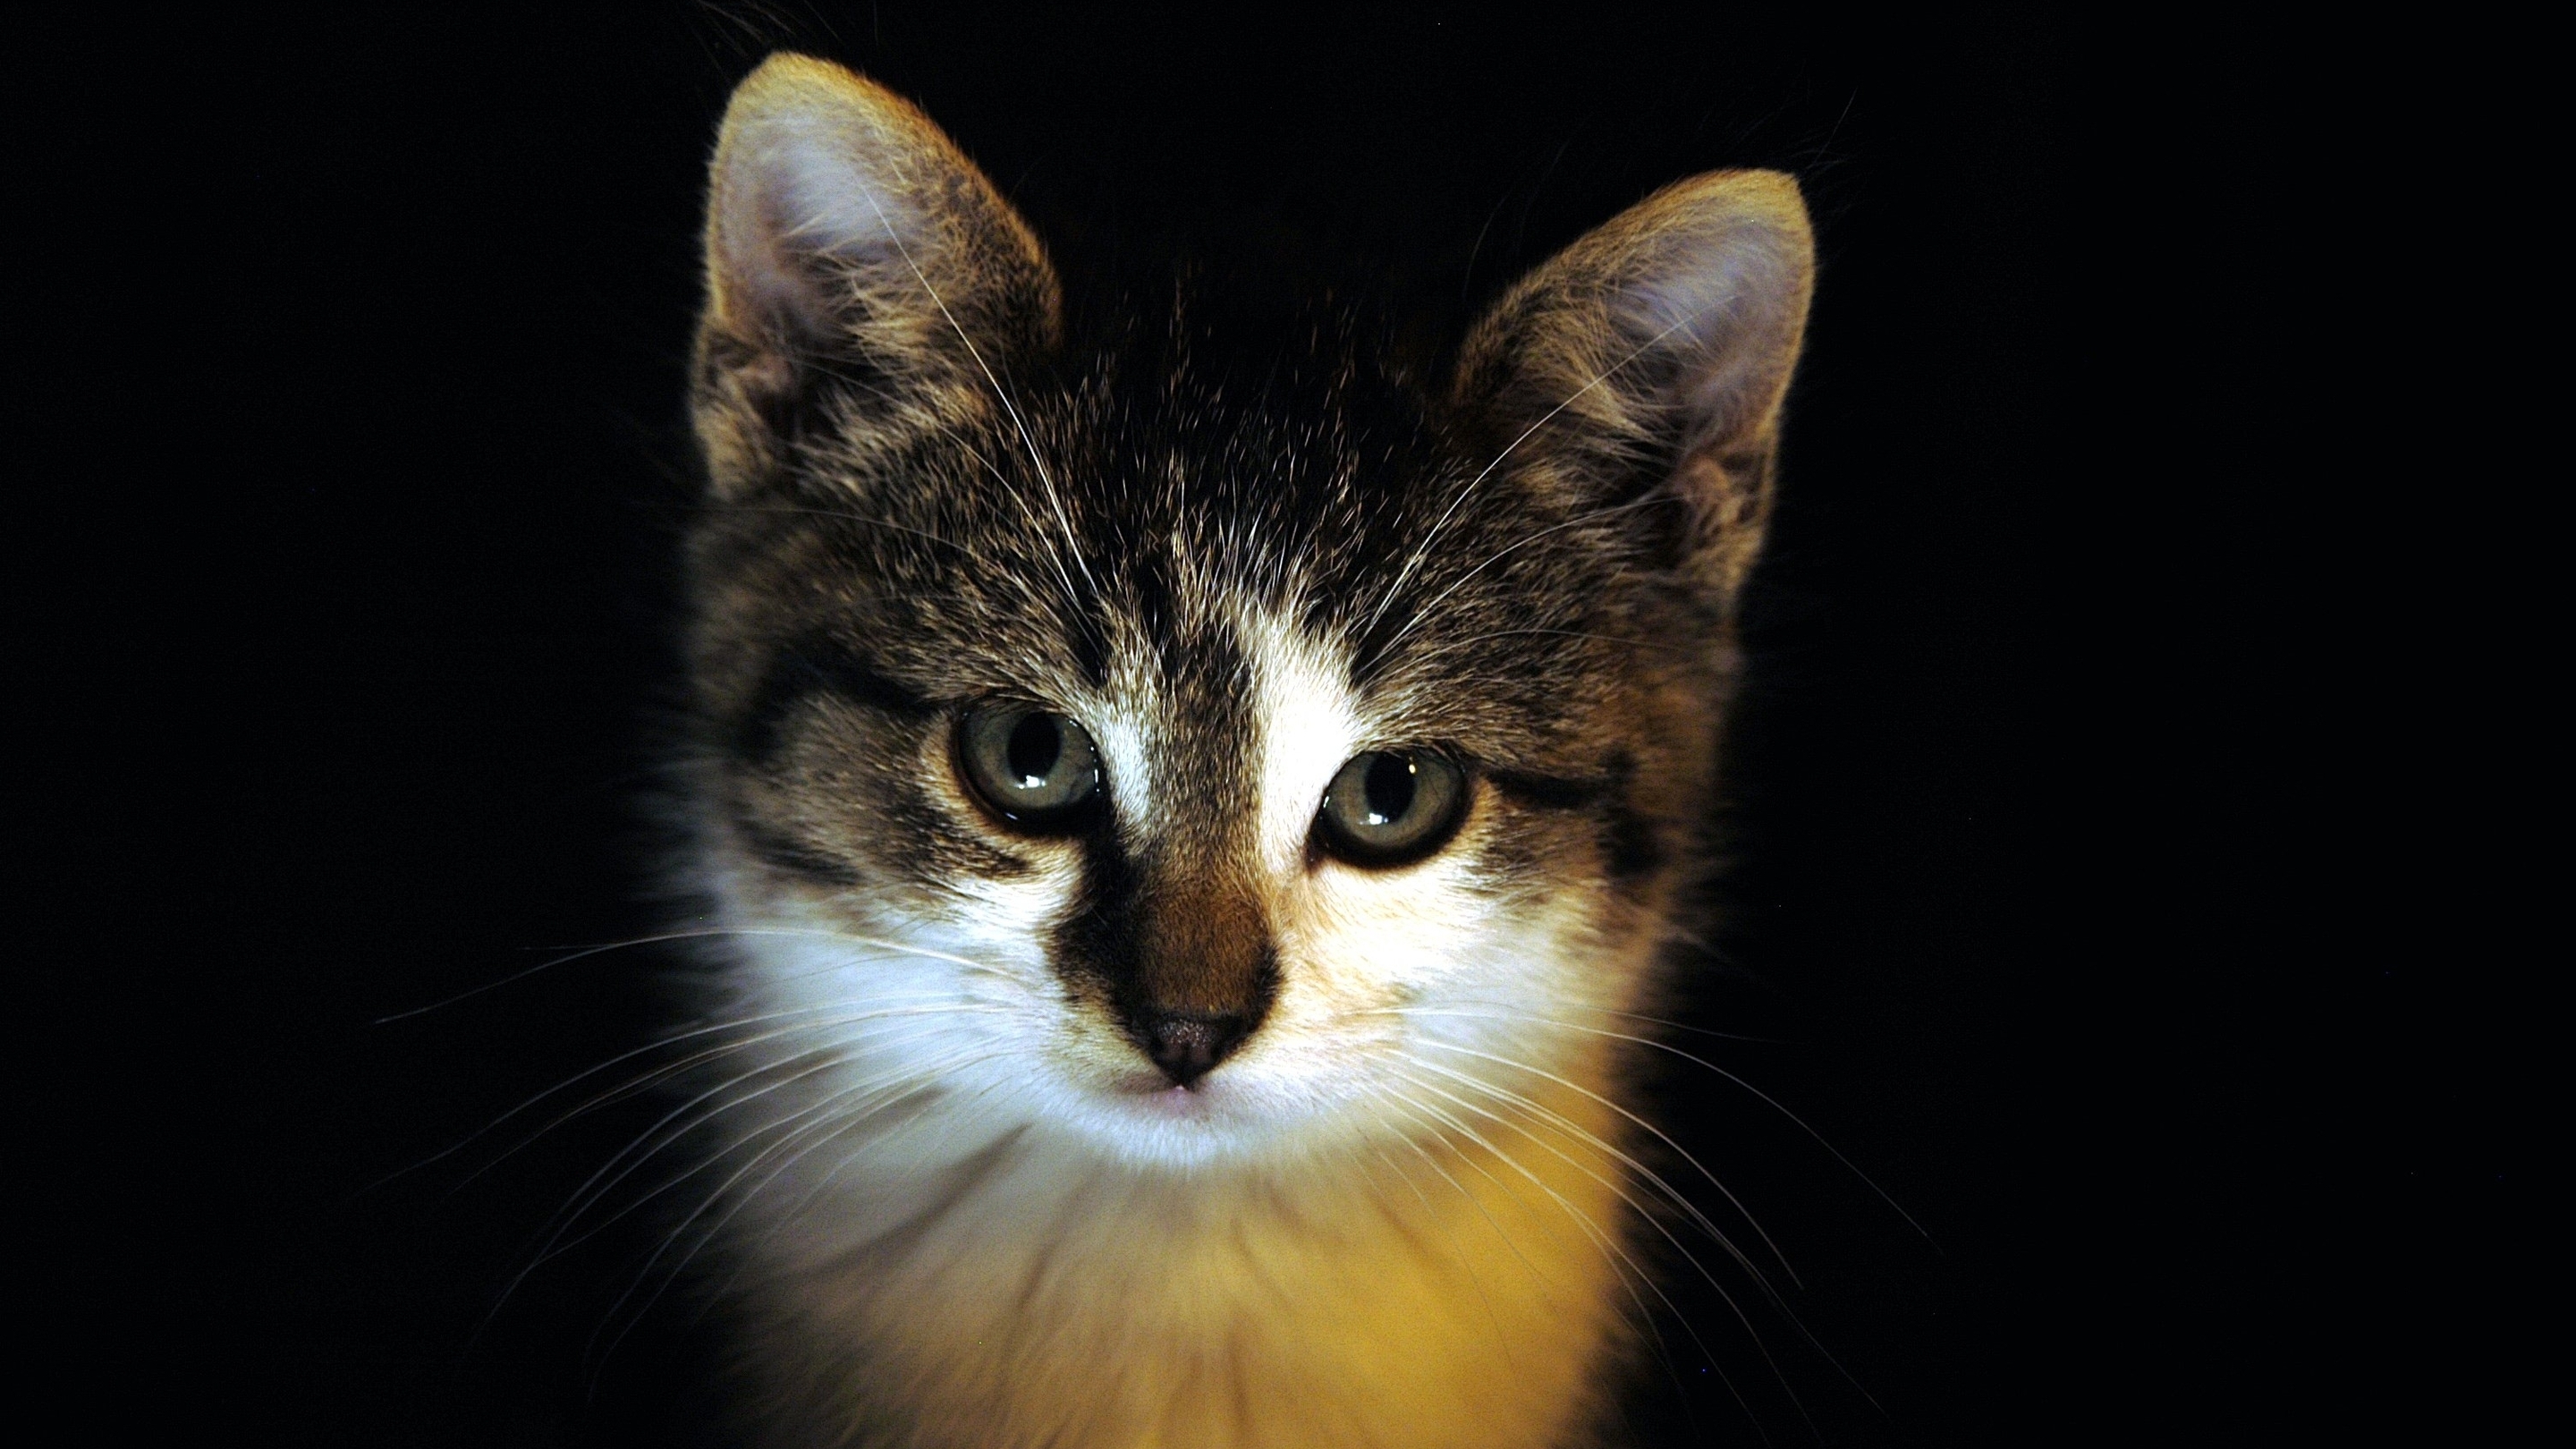 Image: Cat, muzzle, fluffy, color, look, black background